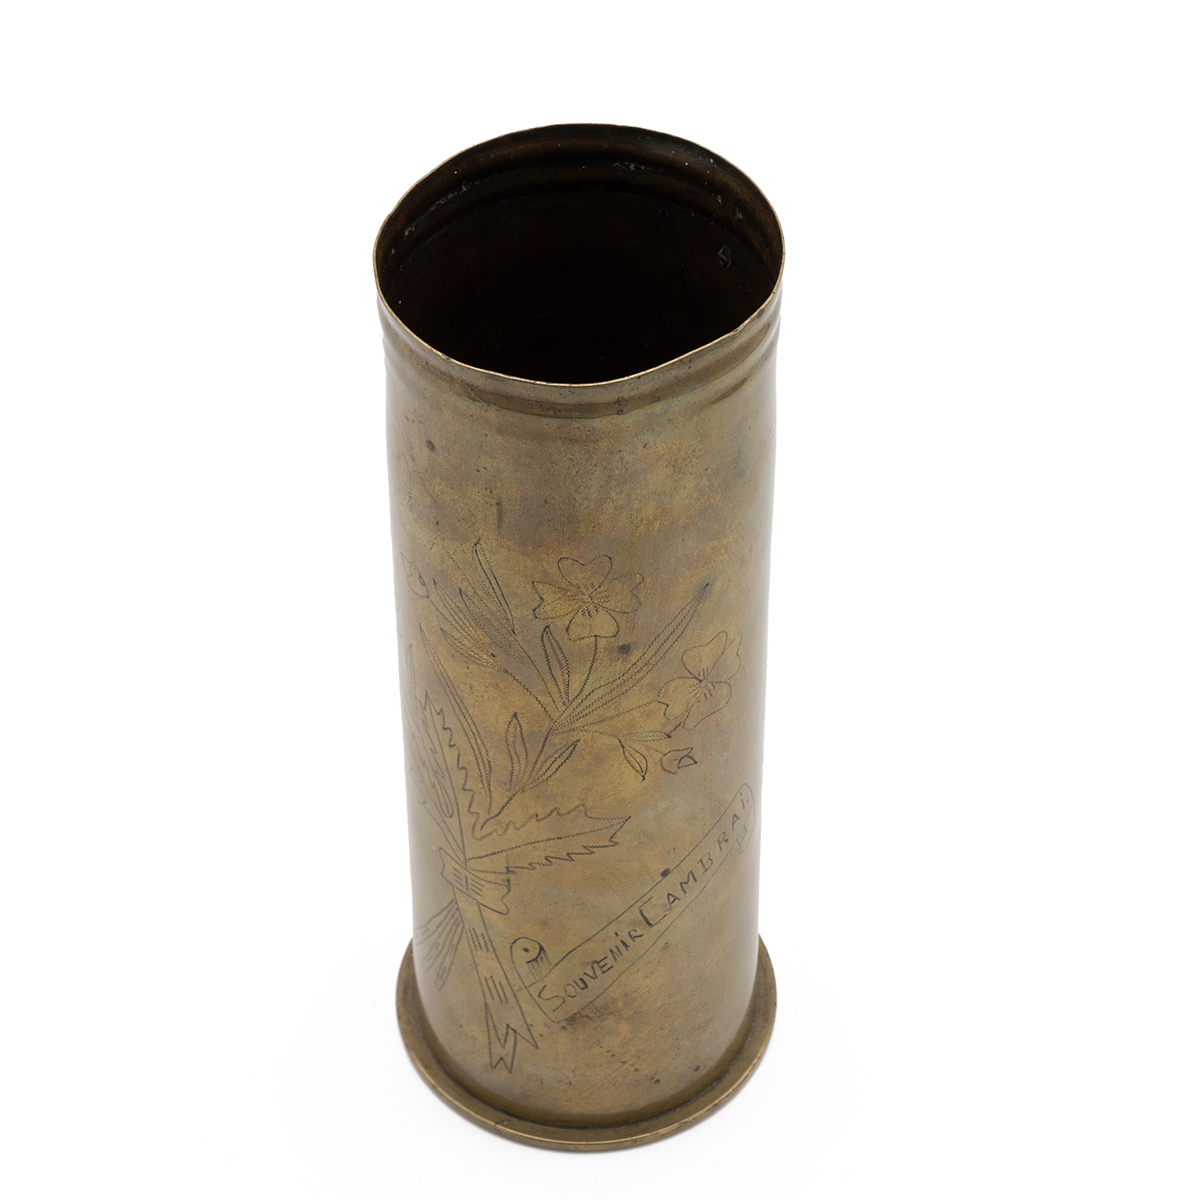 World War I trench art brass shell case vase with pricked decoration of four leafed clovers, oak ... - Image 3 of 4